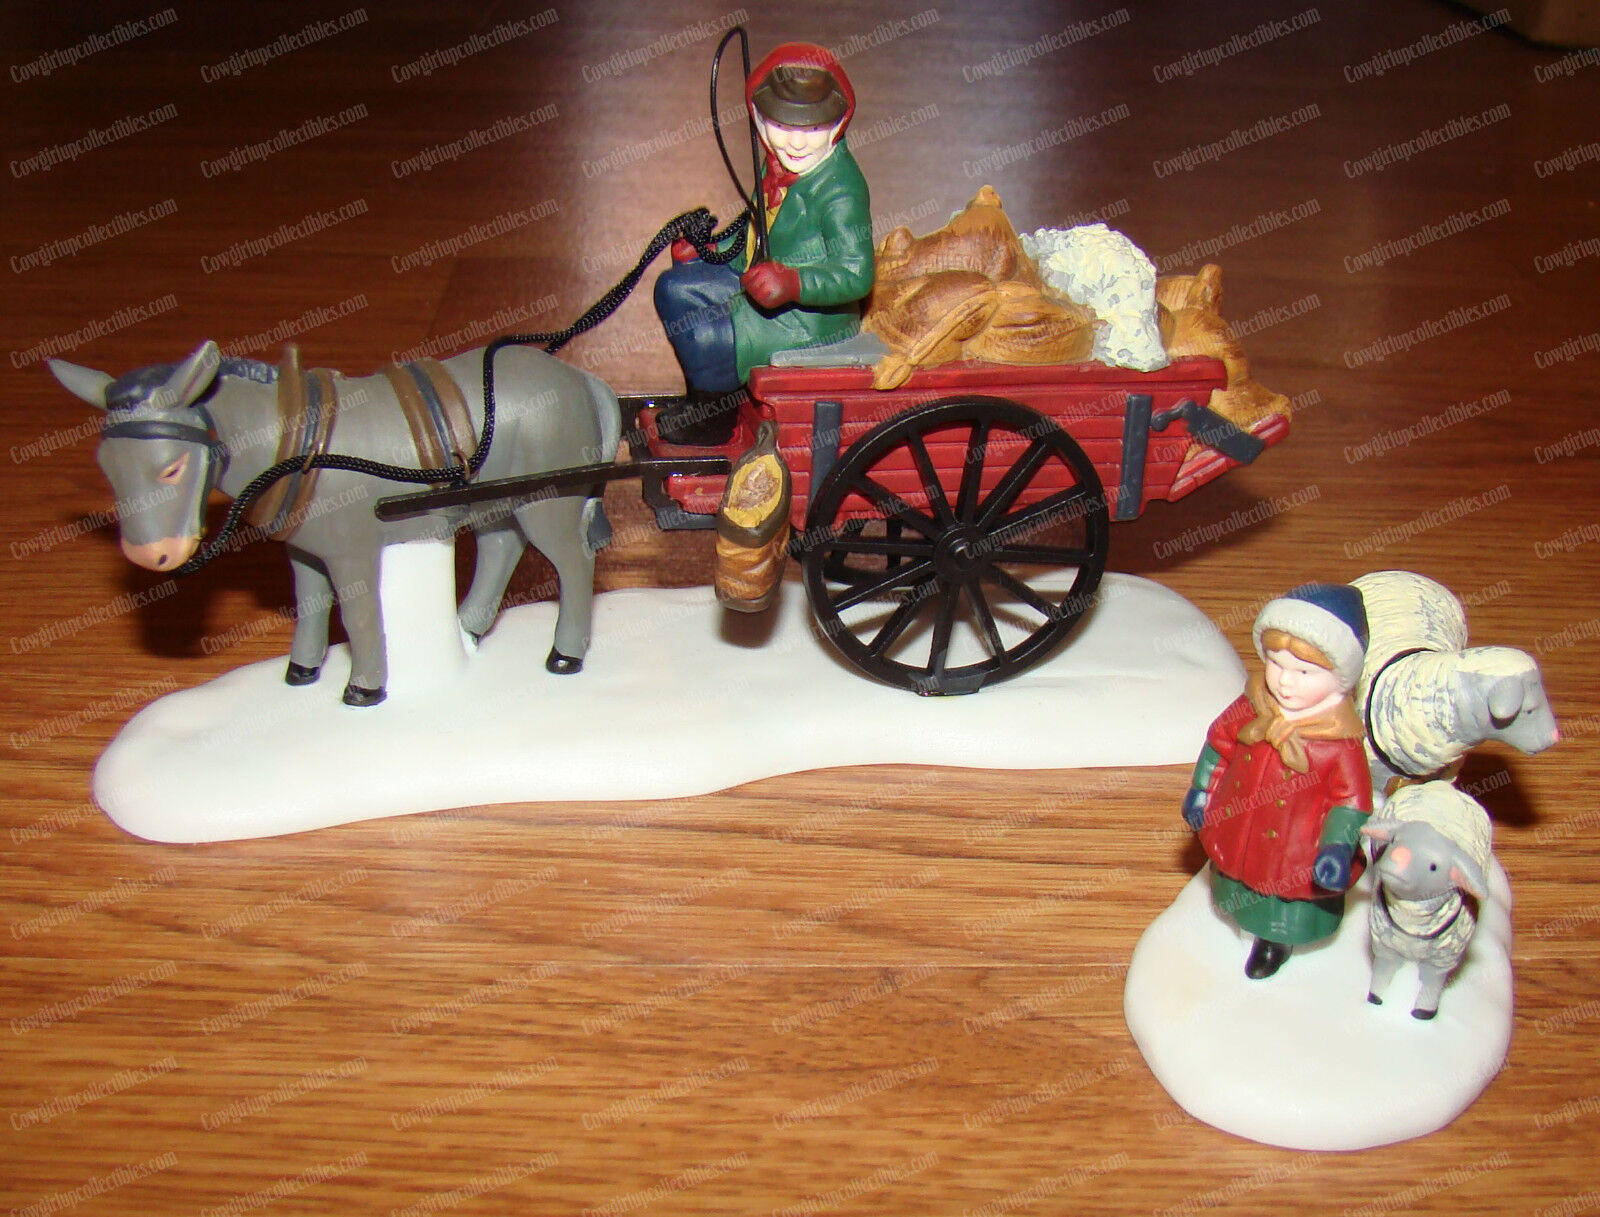 Bringing Fleeces to Mill (Dept. 56, Heritage Village Collection, 5819-0) 1993